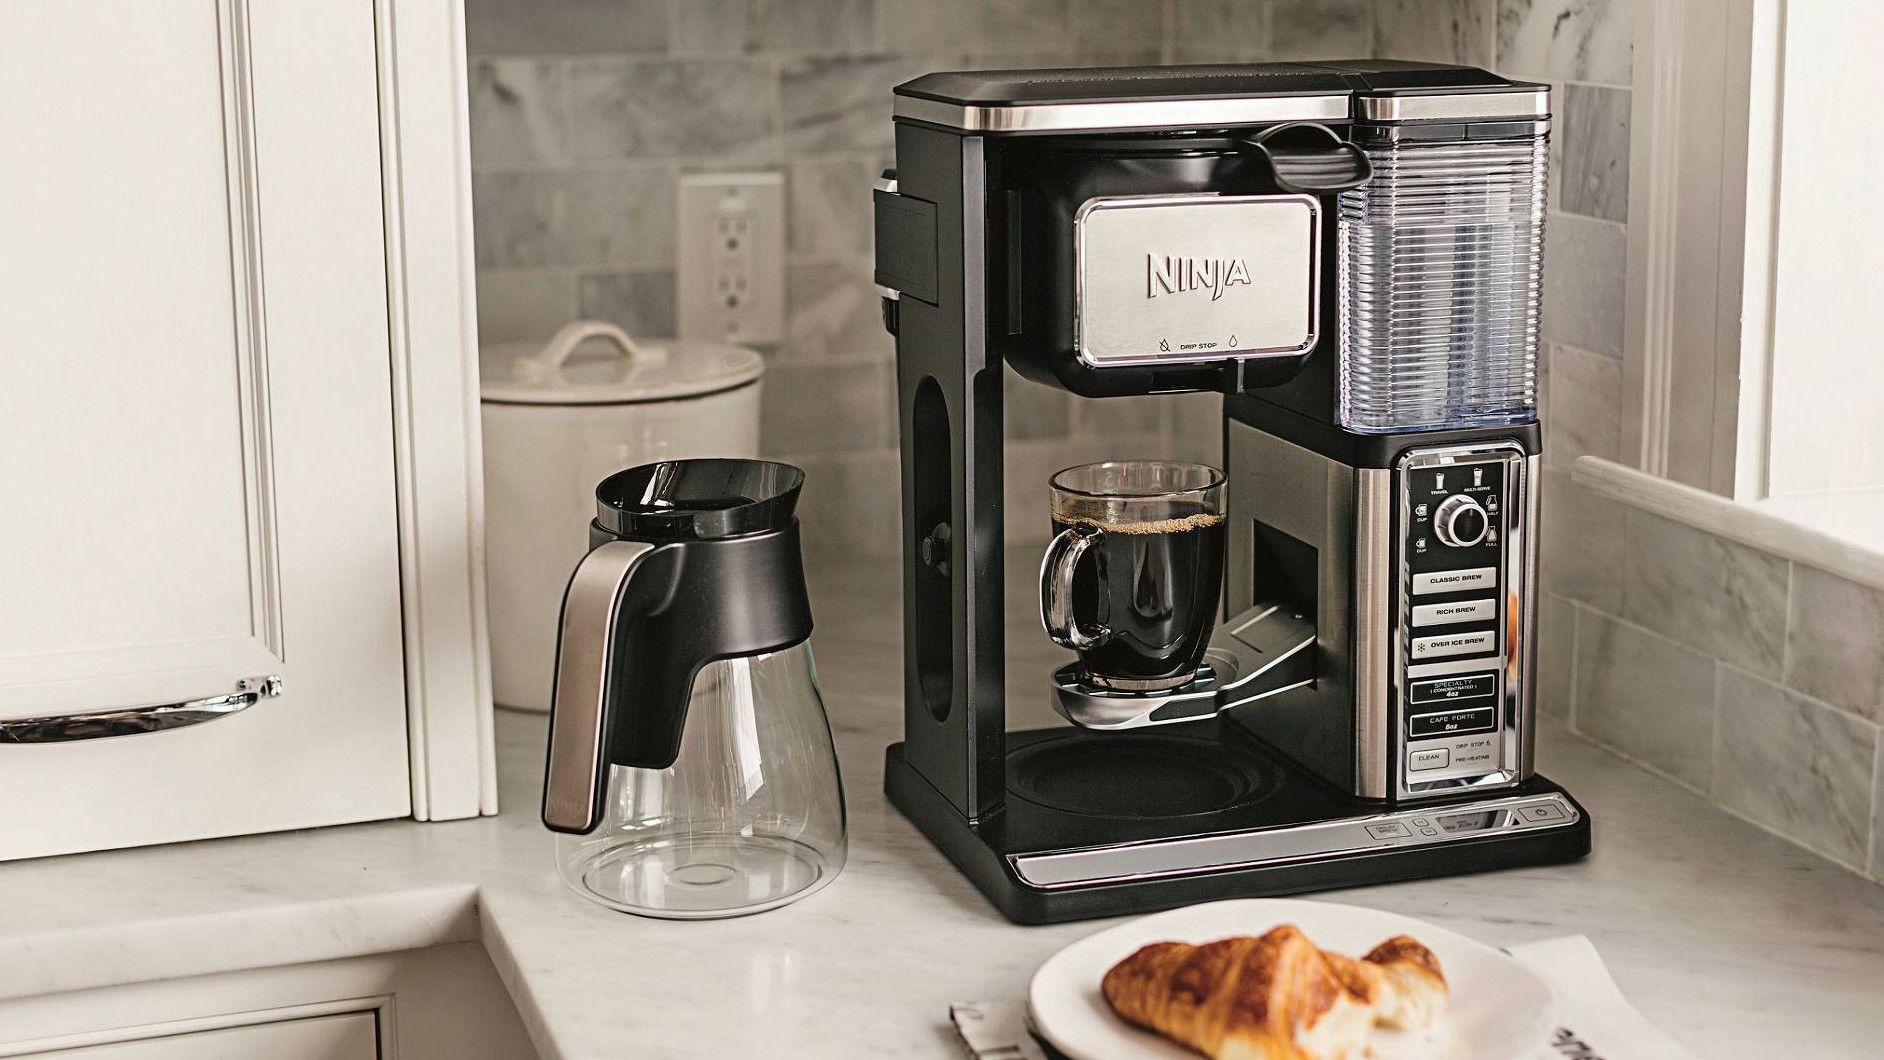 A Coffee Lovers Dream - A Review of the Ninja Coffee Bar System